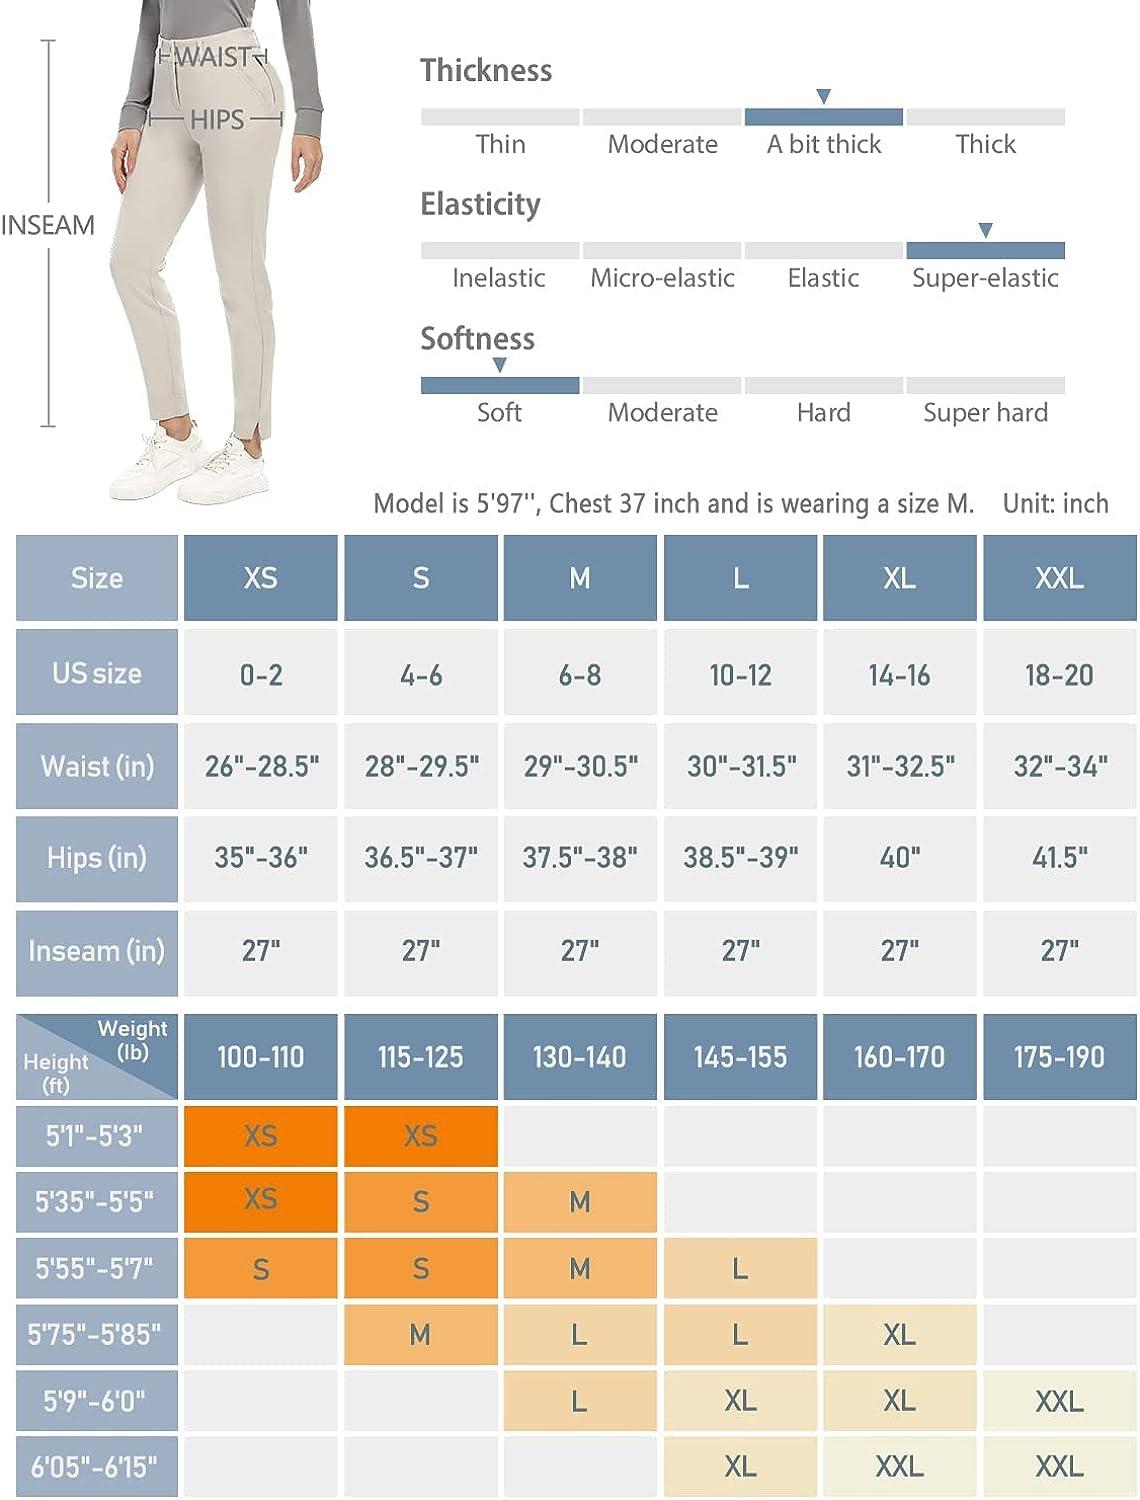 Hiverlay Womens Golf Pants Work Pants Stretch Lightweight Dress Pants  Business Casual with Zipper Pocket White Sand Large